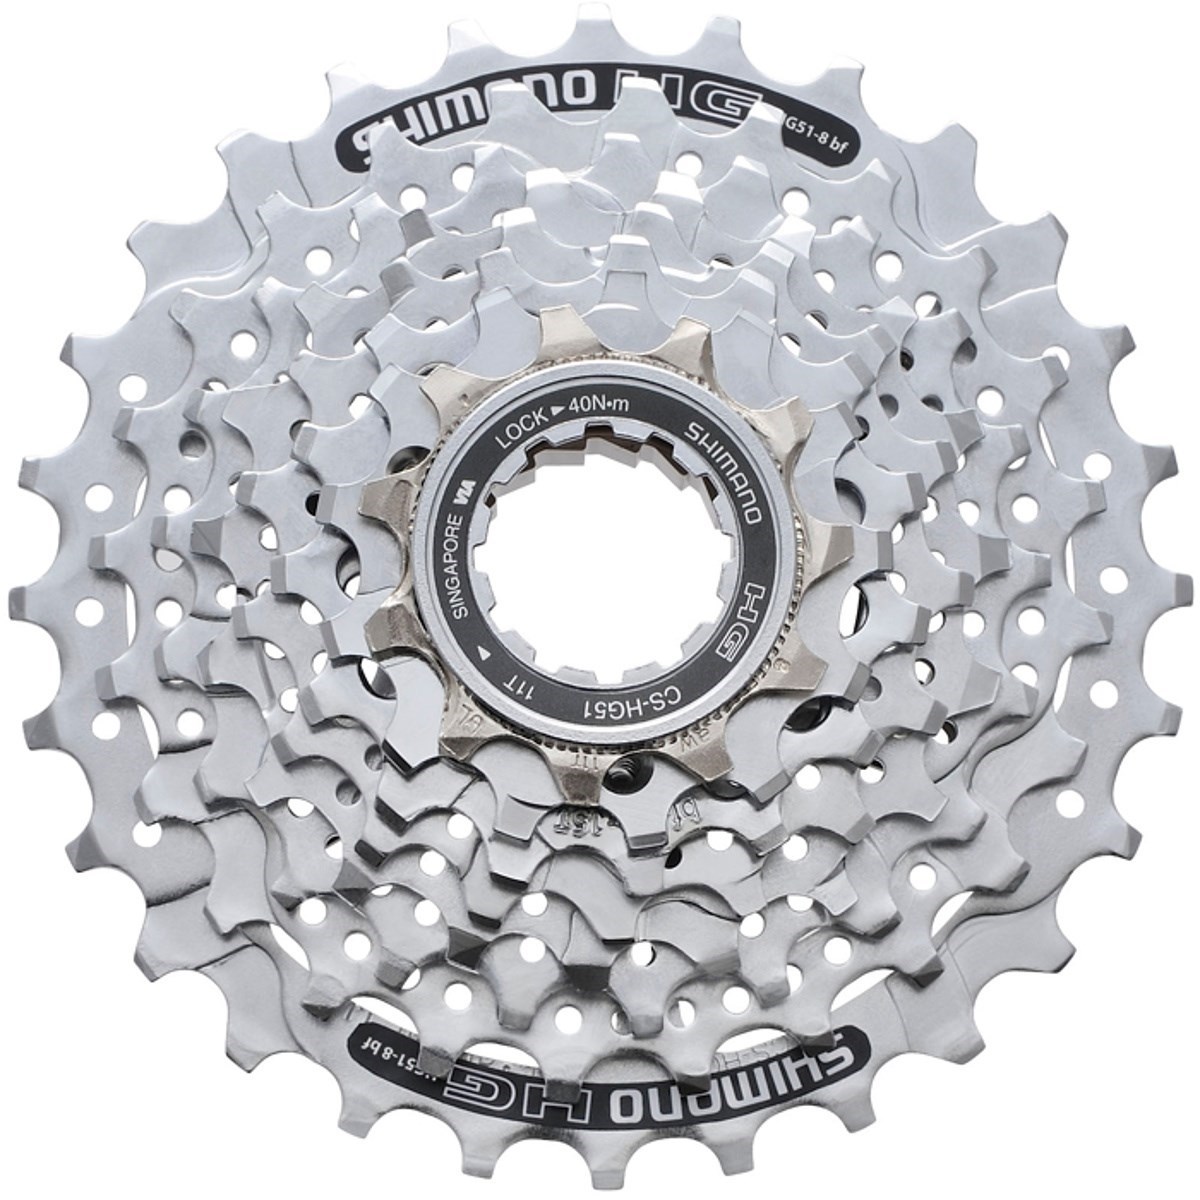 Shimano CS-HG51 8-speed Cassette product image